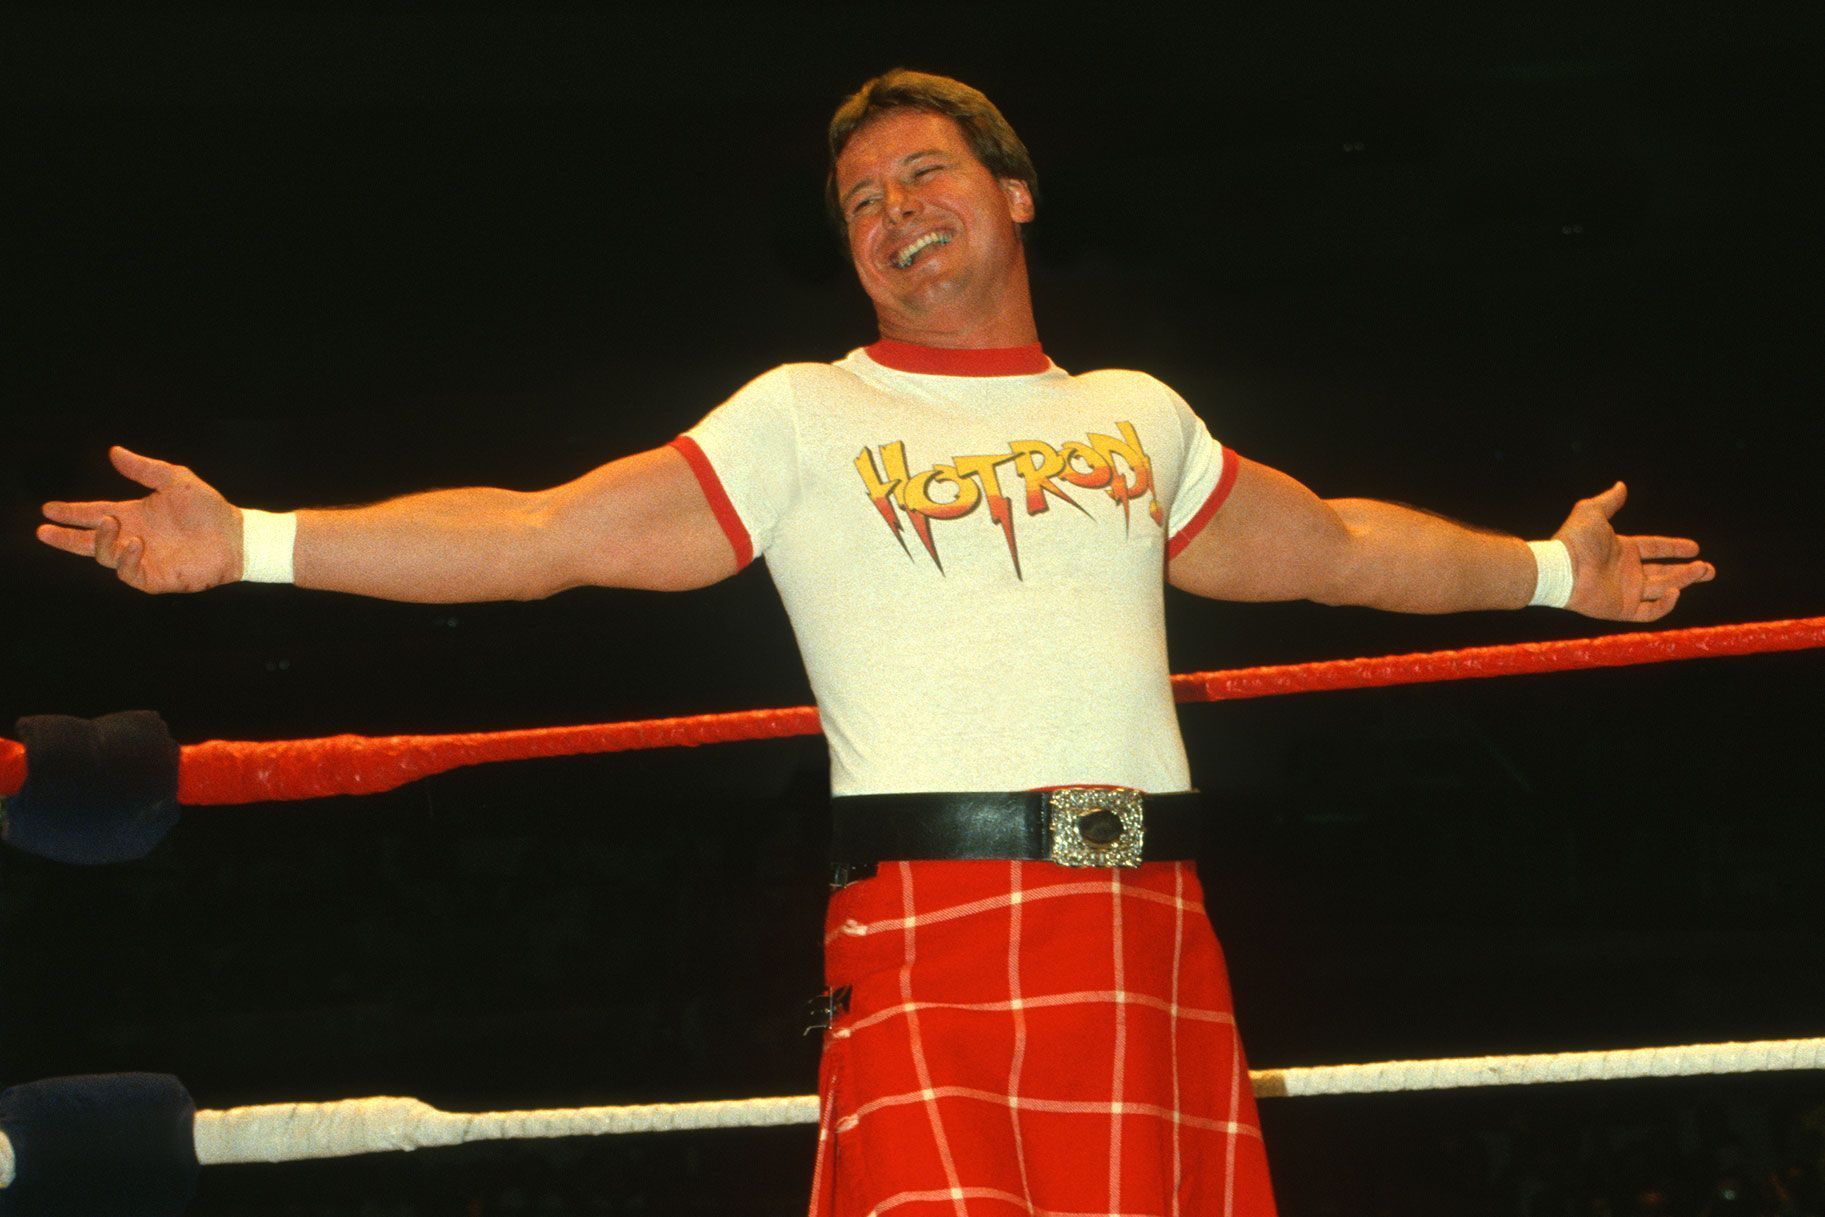 The greatest villain of all time, Roddy Piper